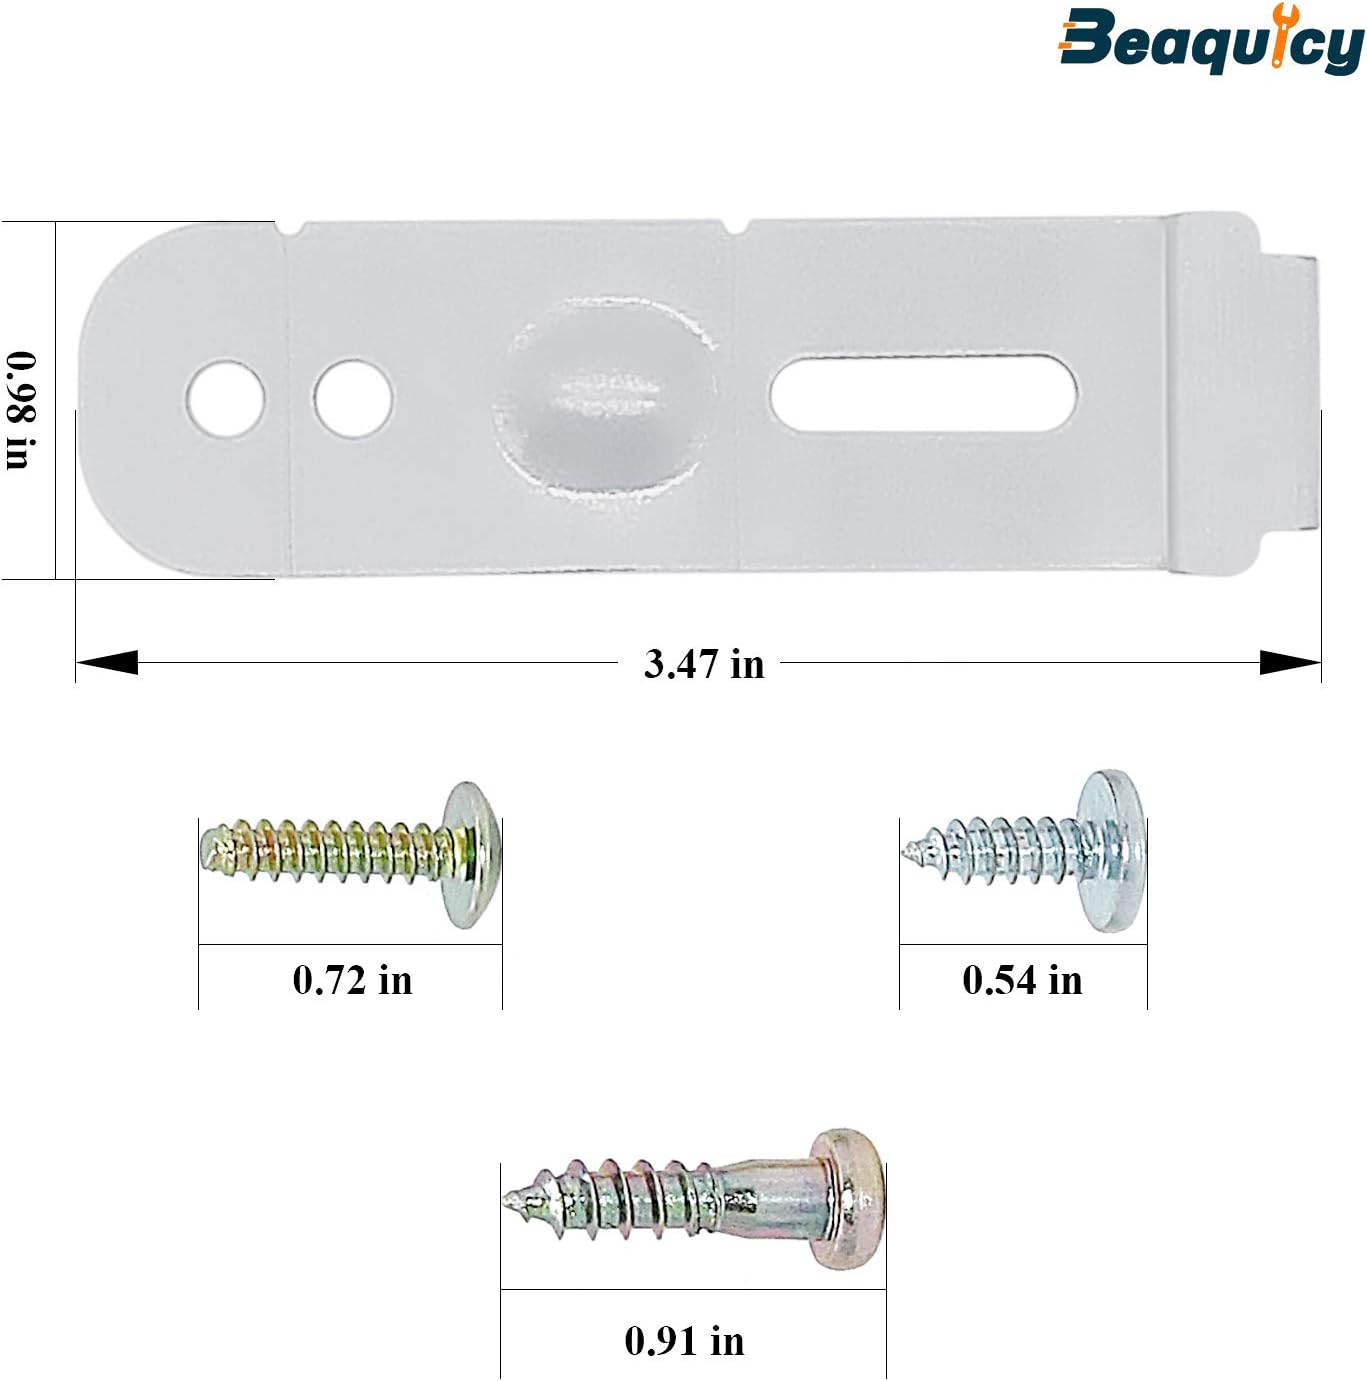 Beaquicy DD94-01002A Assembly-Install Kit - Replacement for Sam-sung Dishwashers - Includes 2 Mounting Brackets and Mounting Screws - Re